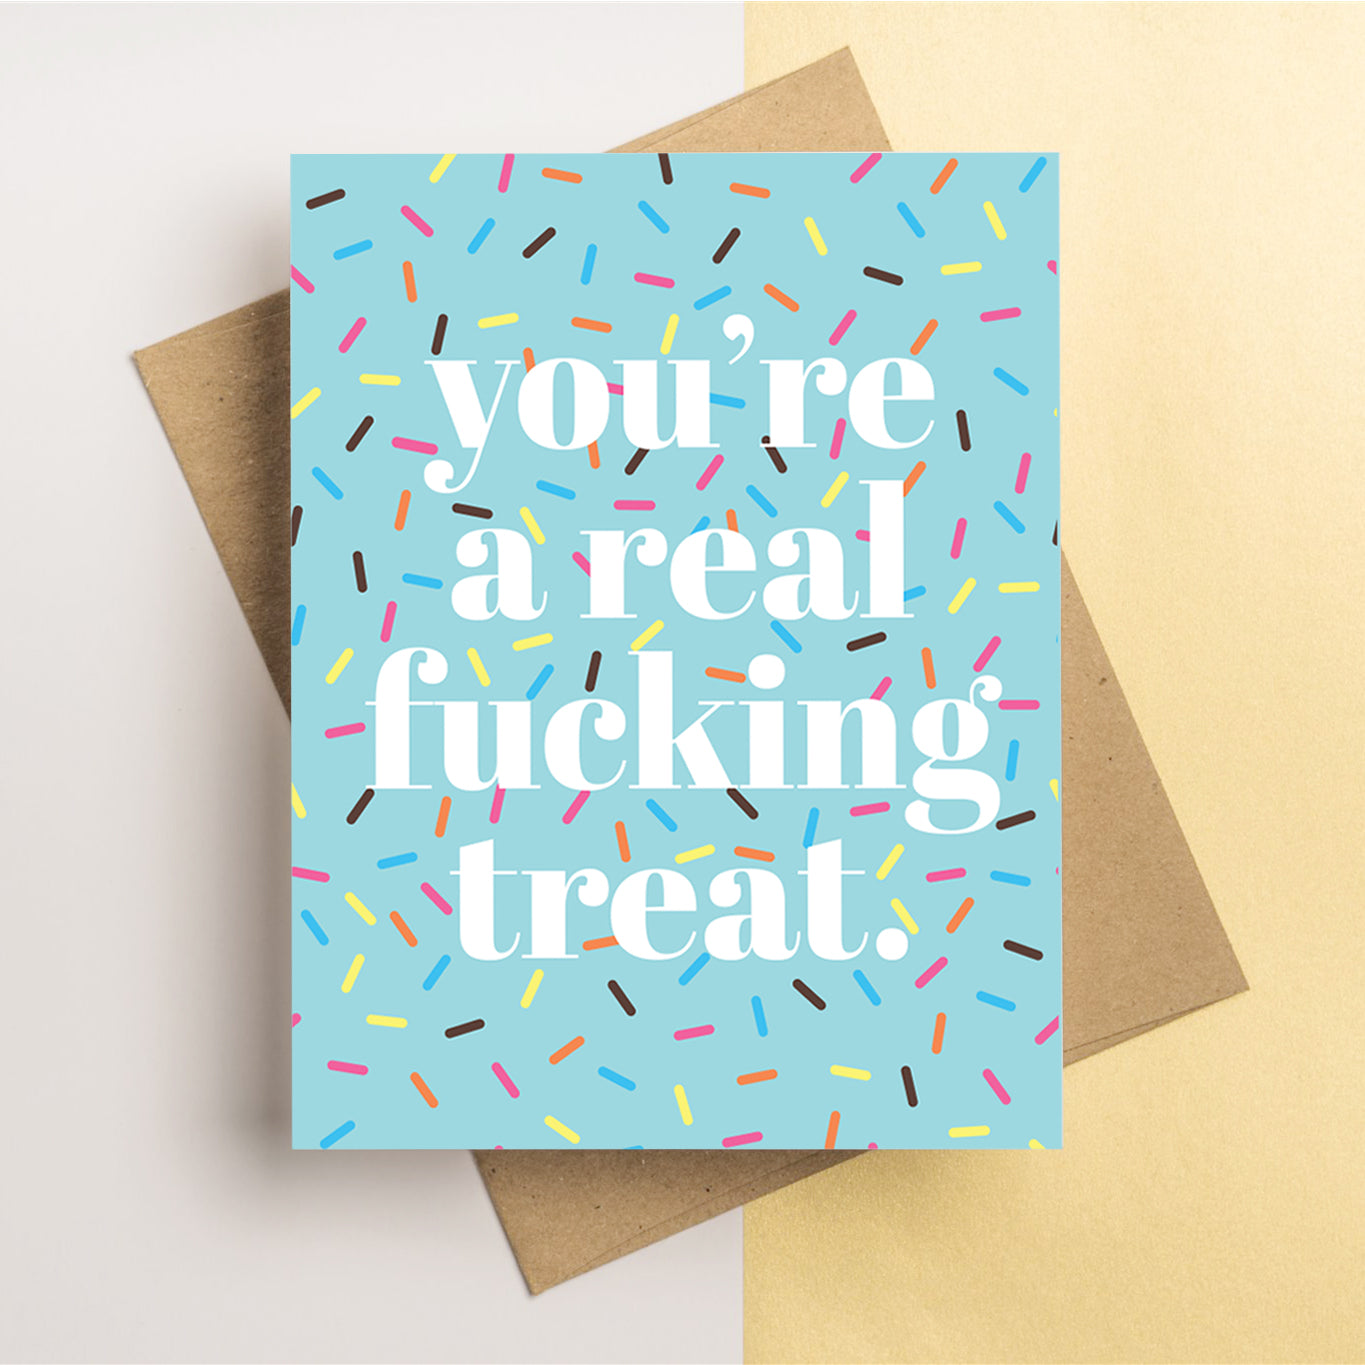 Sarcastic Greeting Card for friends or loves that reads "You're a real fucking treat" with sprinkle pattern.